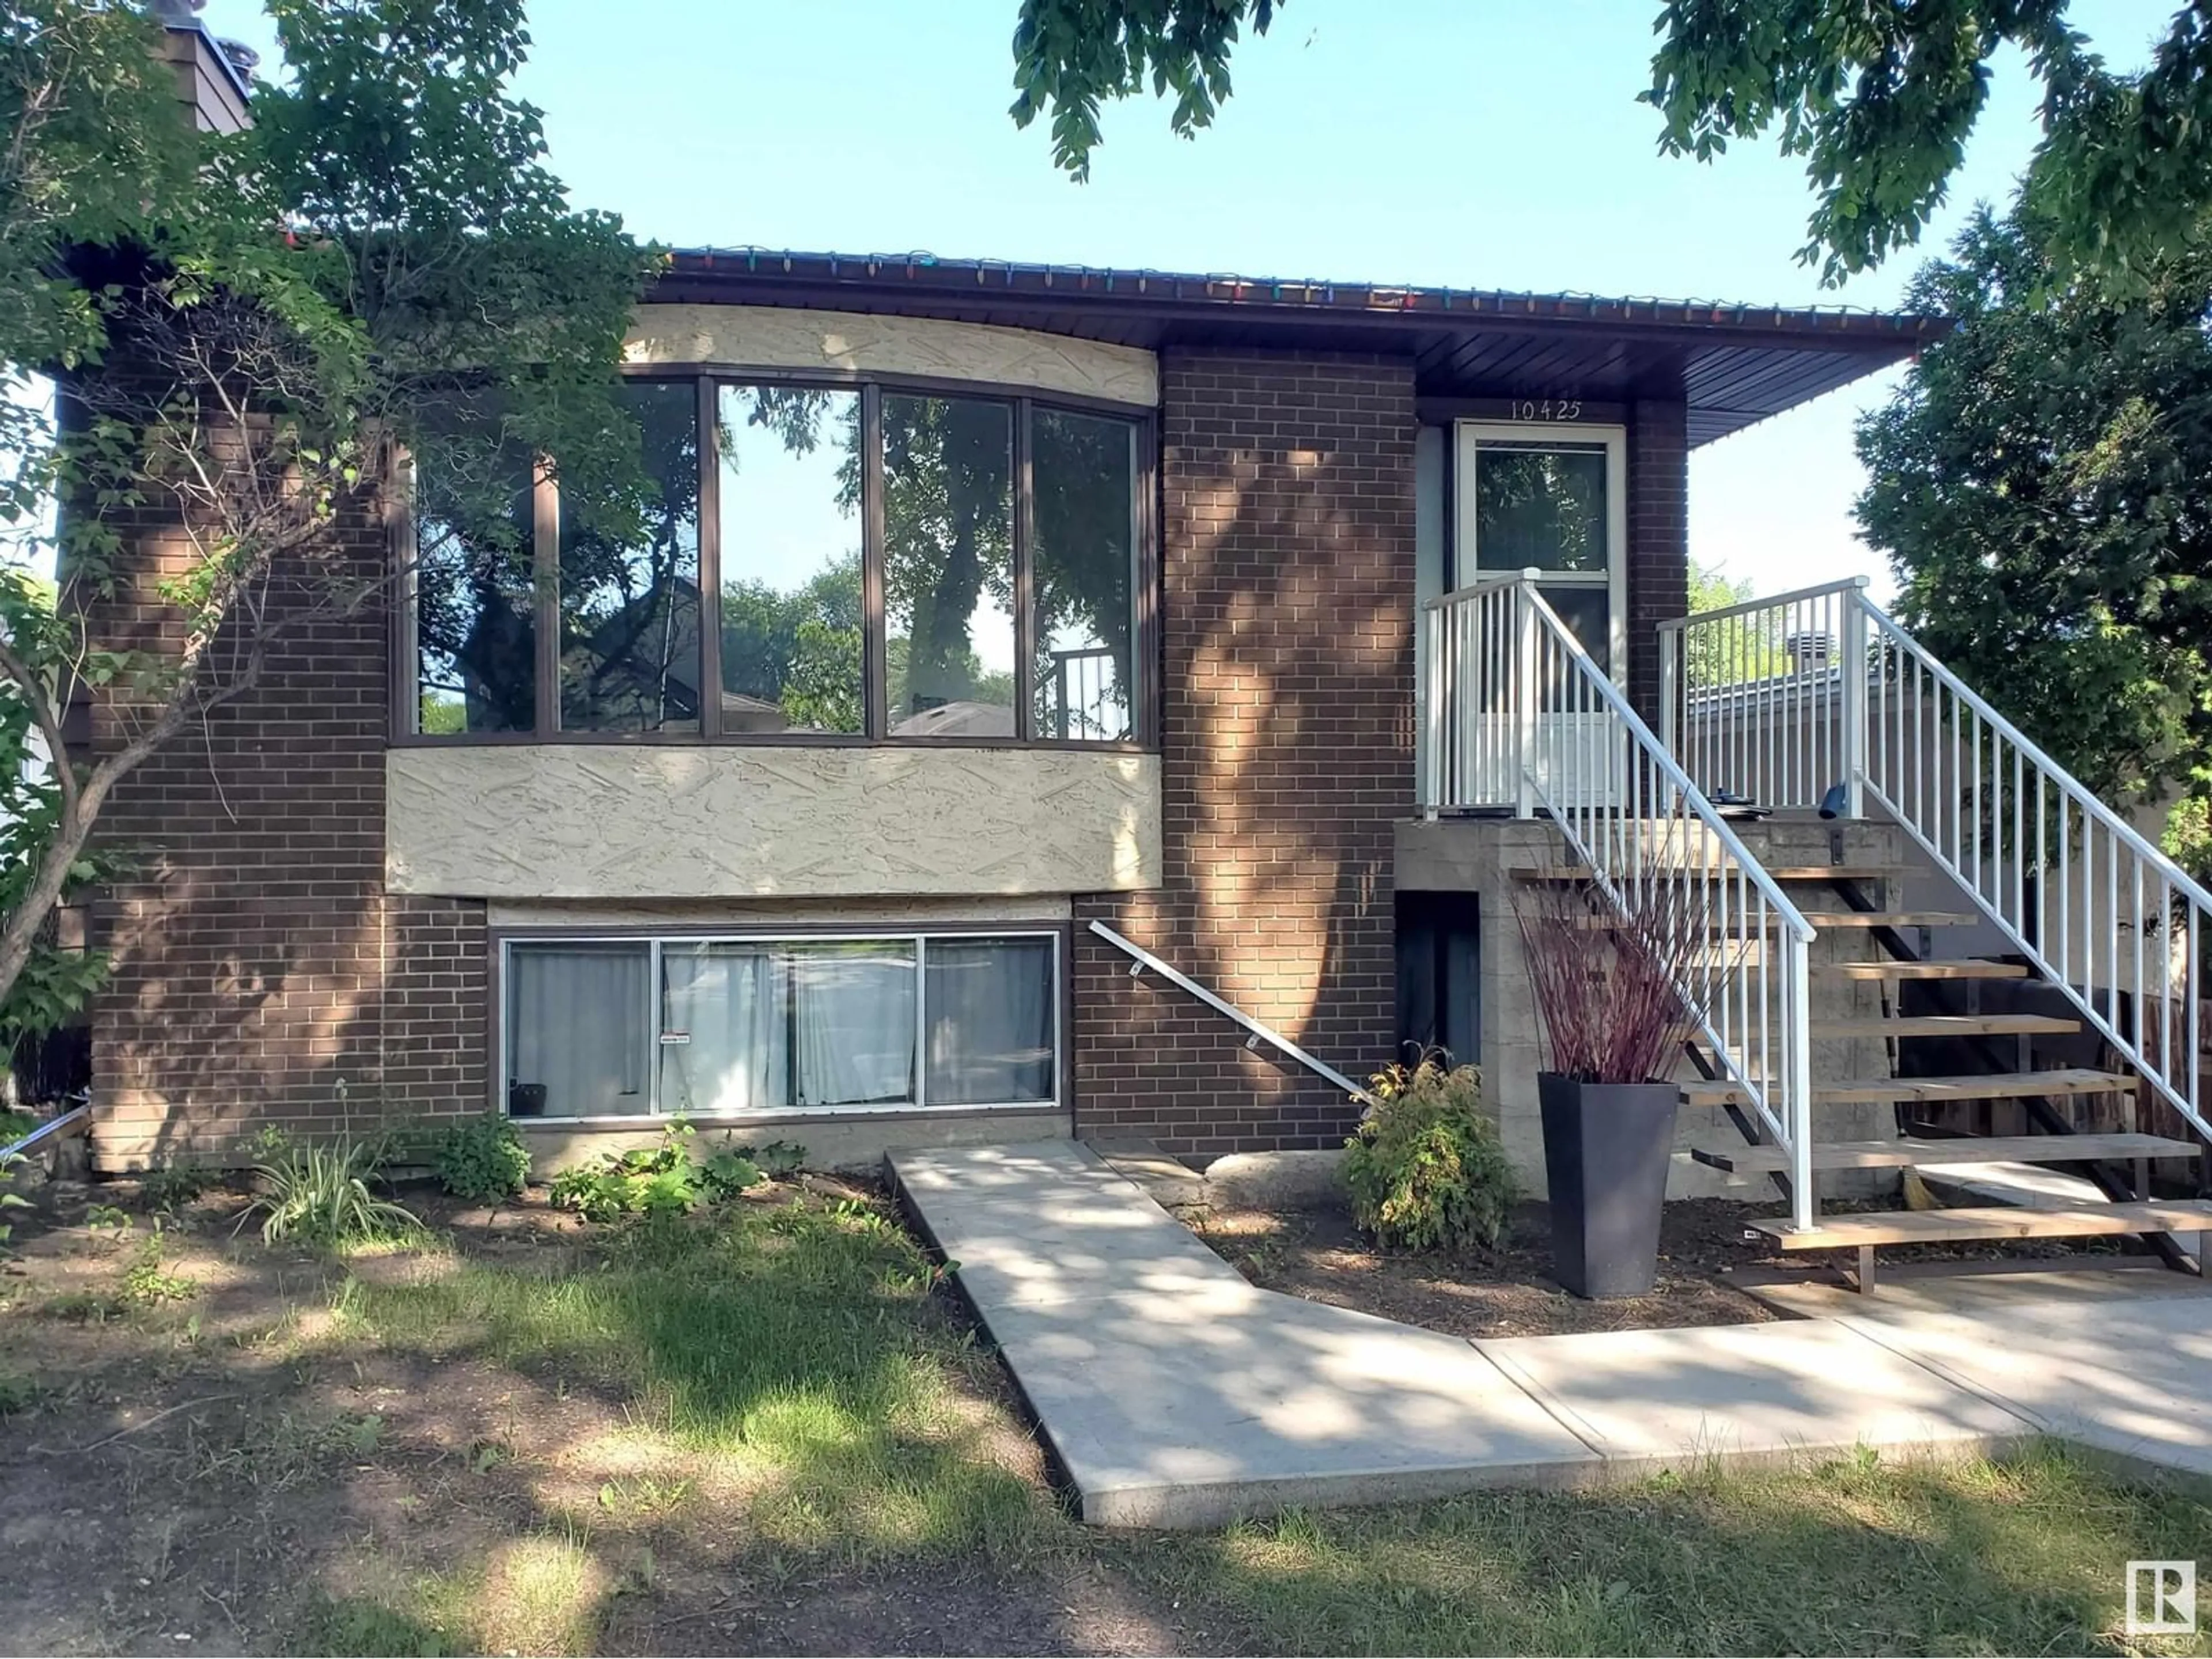 A pic from exterior of the house or condo for 10425 77 ST NW, Edmonton Alberta T6A3C5